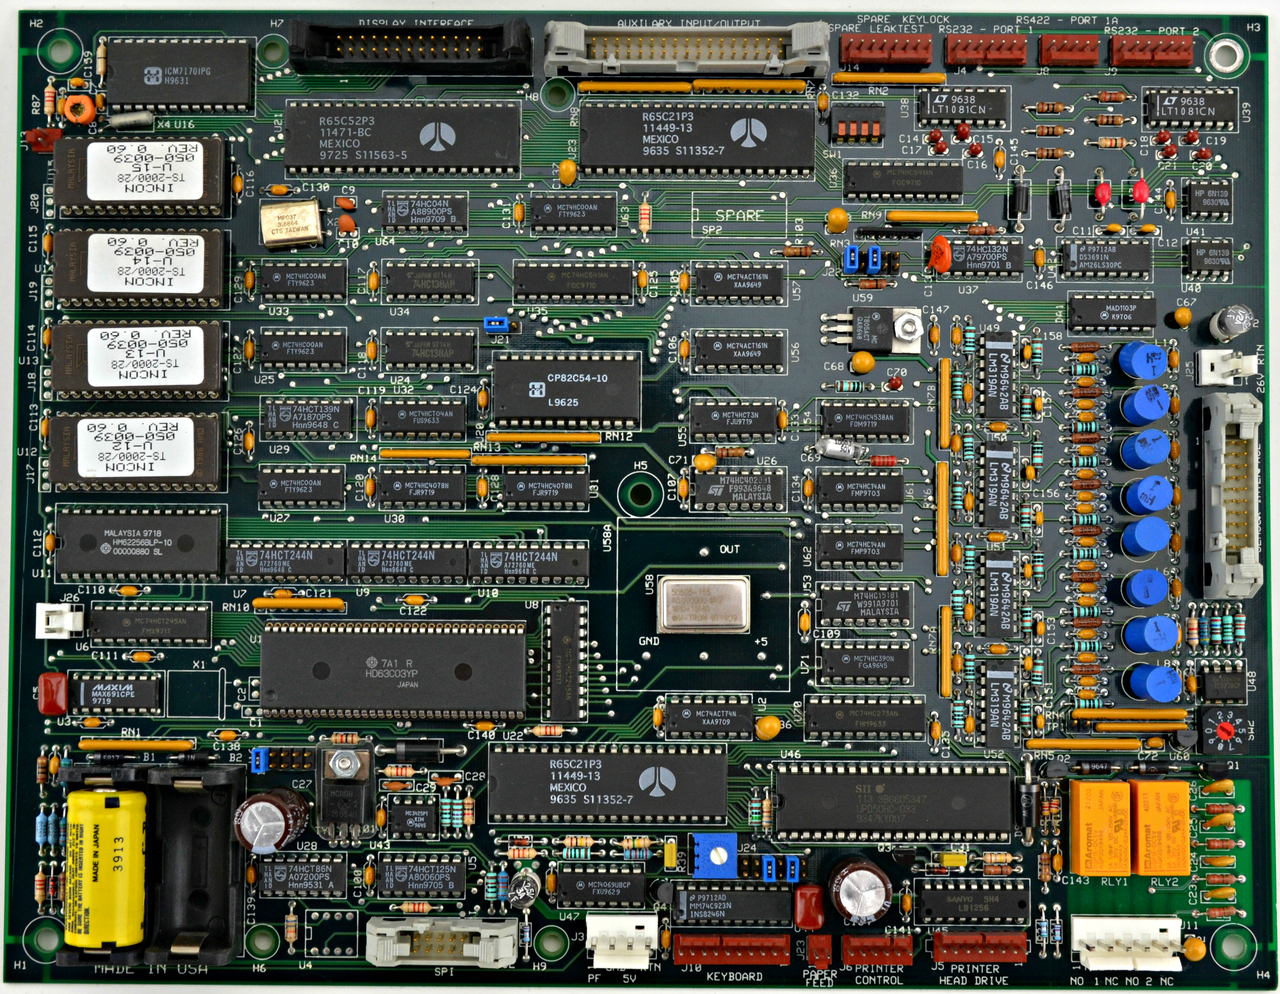 TS-2000 MAIN SYSTEM BOARD, Fits Incon Image